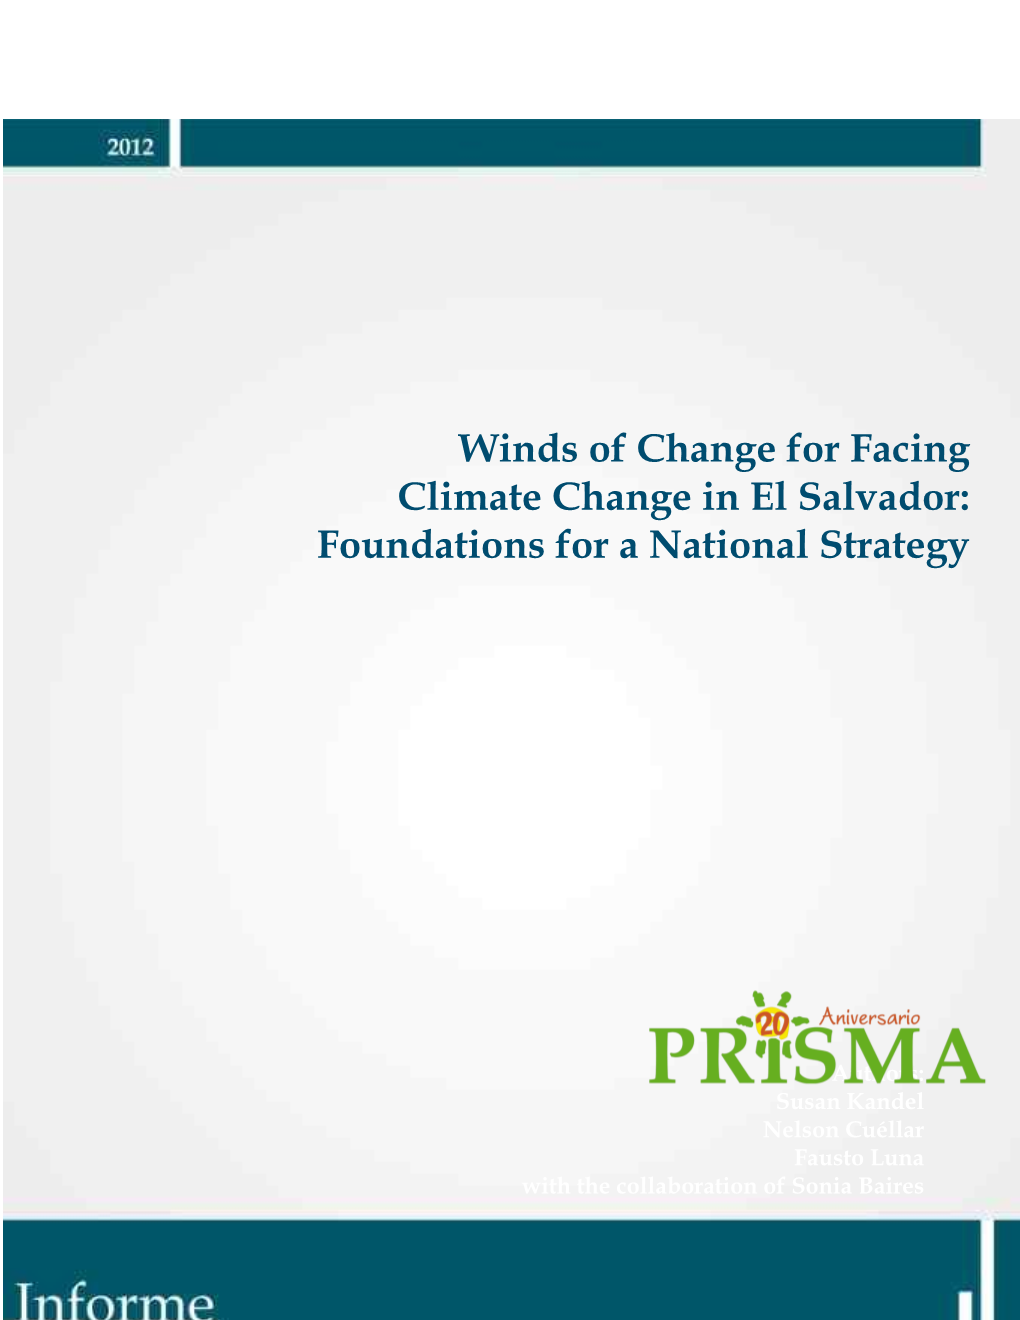 Winds of Change for Facing Climate Change in El Salvador: Foundations for a National Strategy